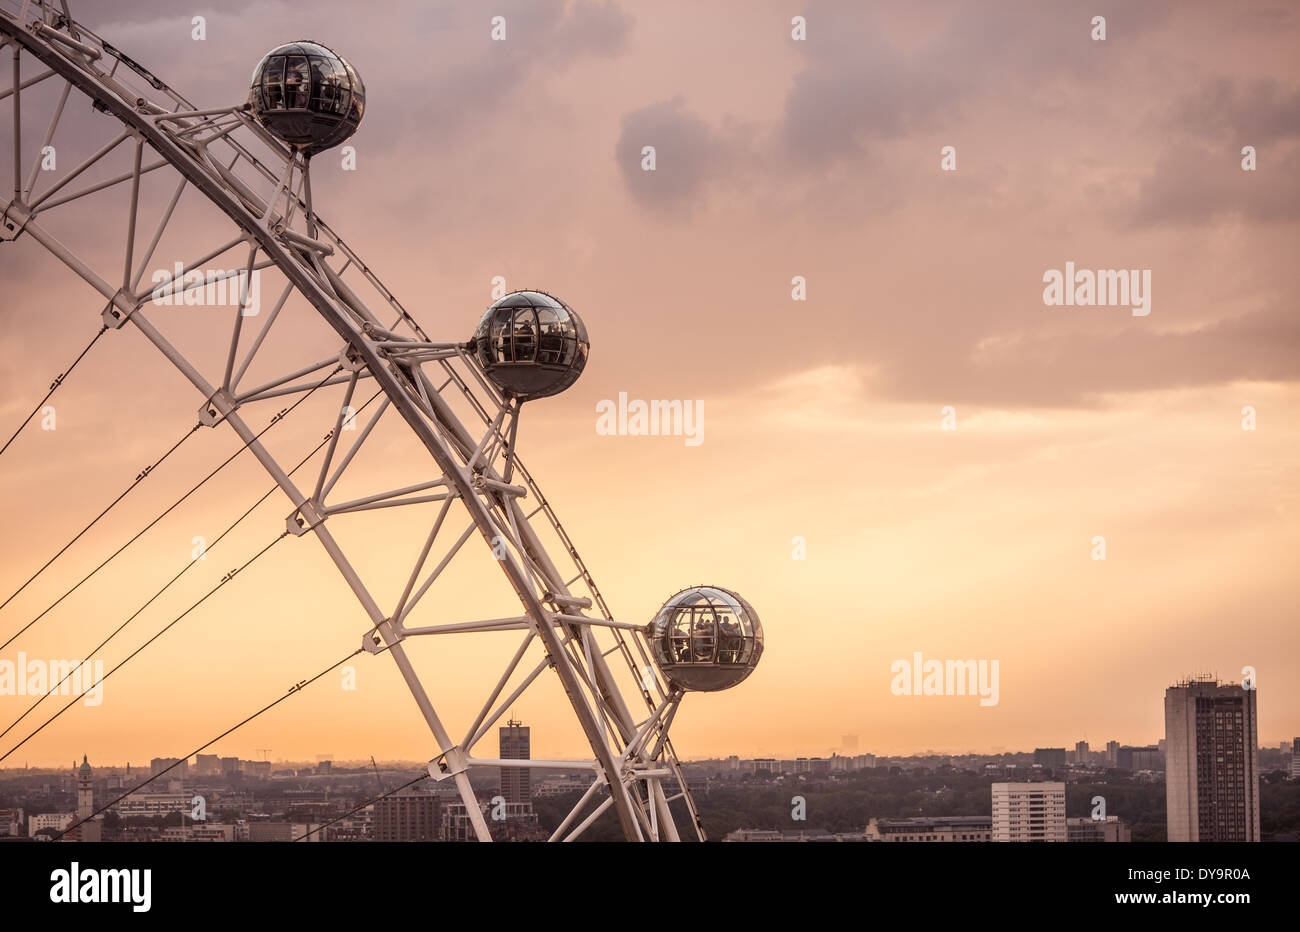 A close-up shot of the London Eye wheel against a dramatic sky Stock Photo